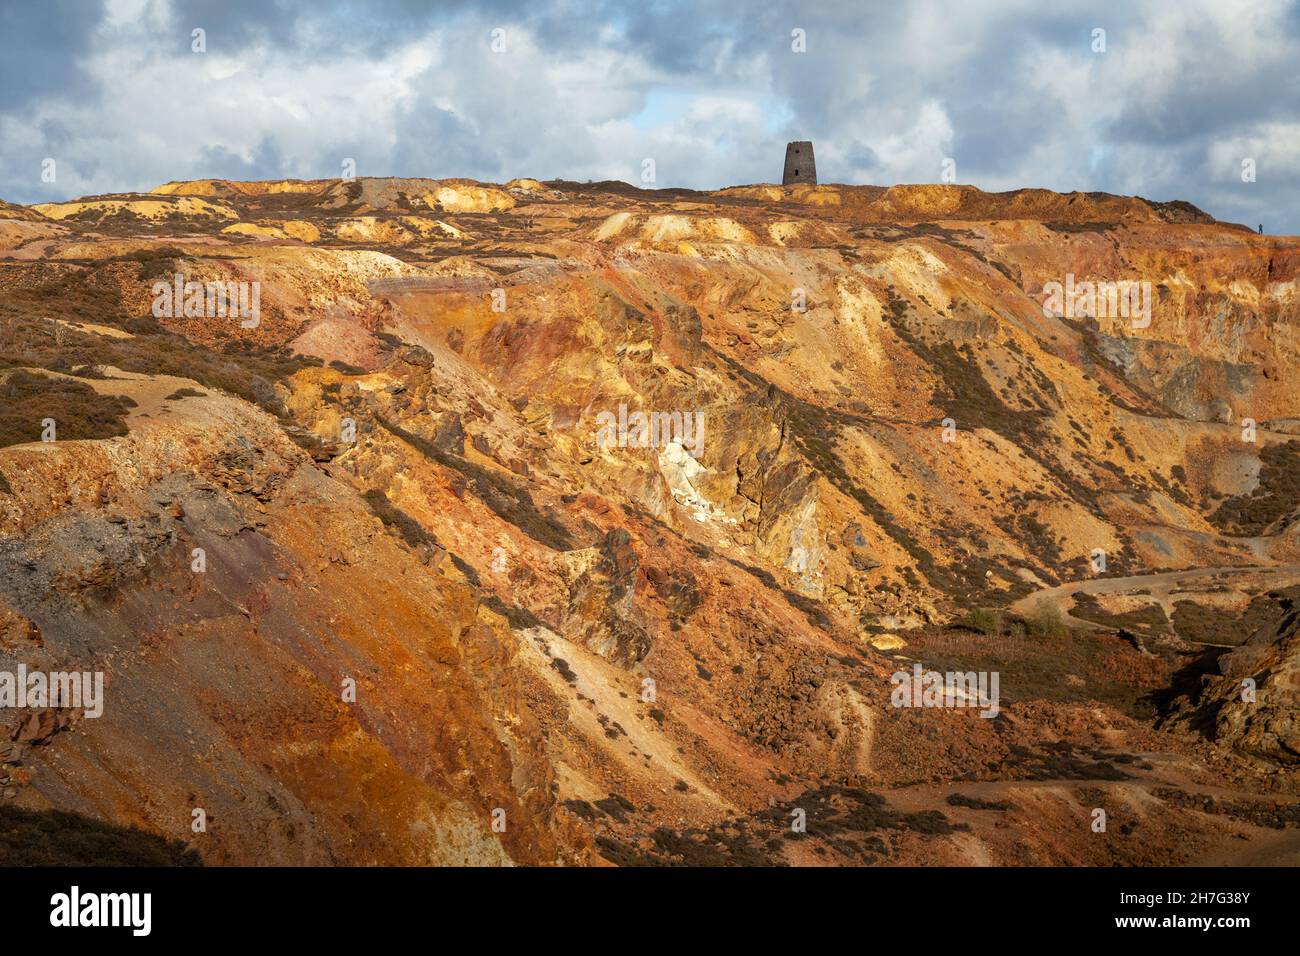 The very colourful disused copper mine at amlwch copper kingdom, Wales Stock Photo